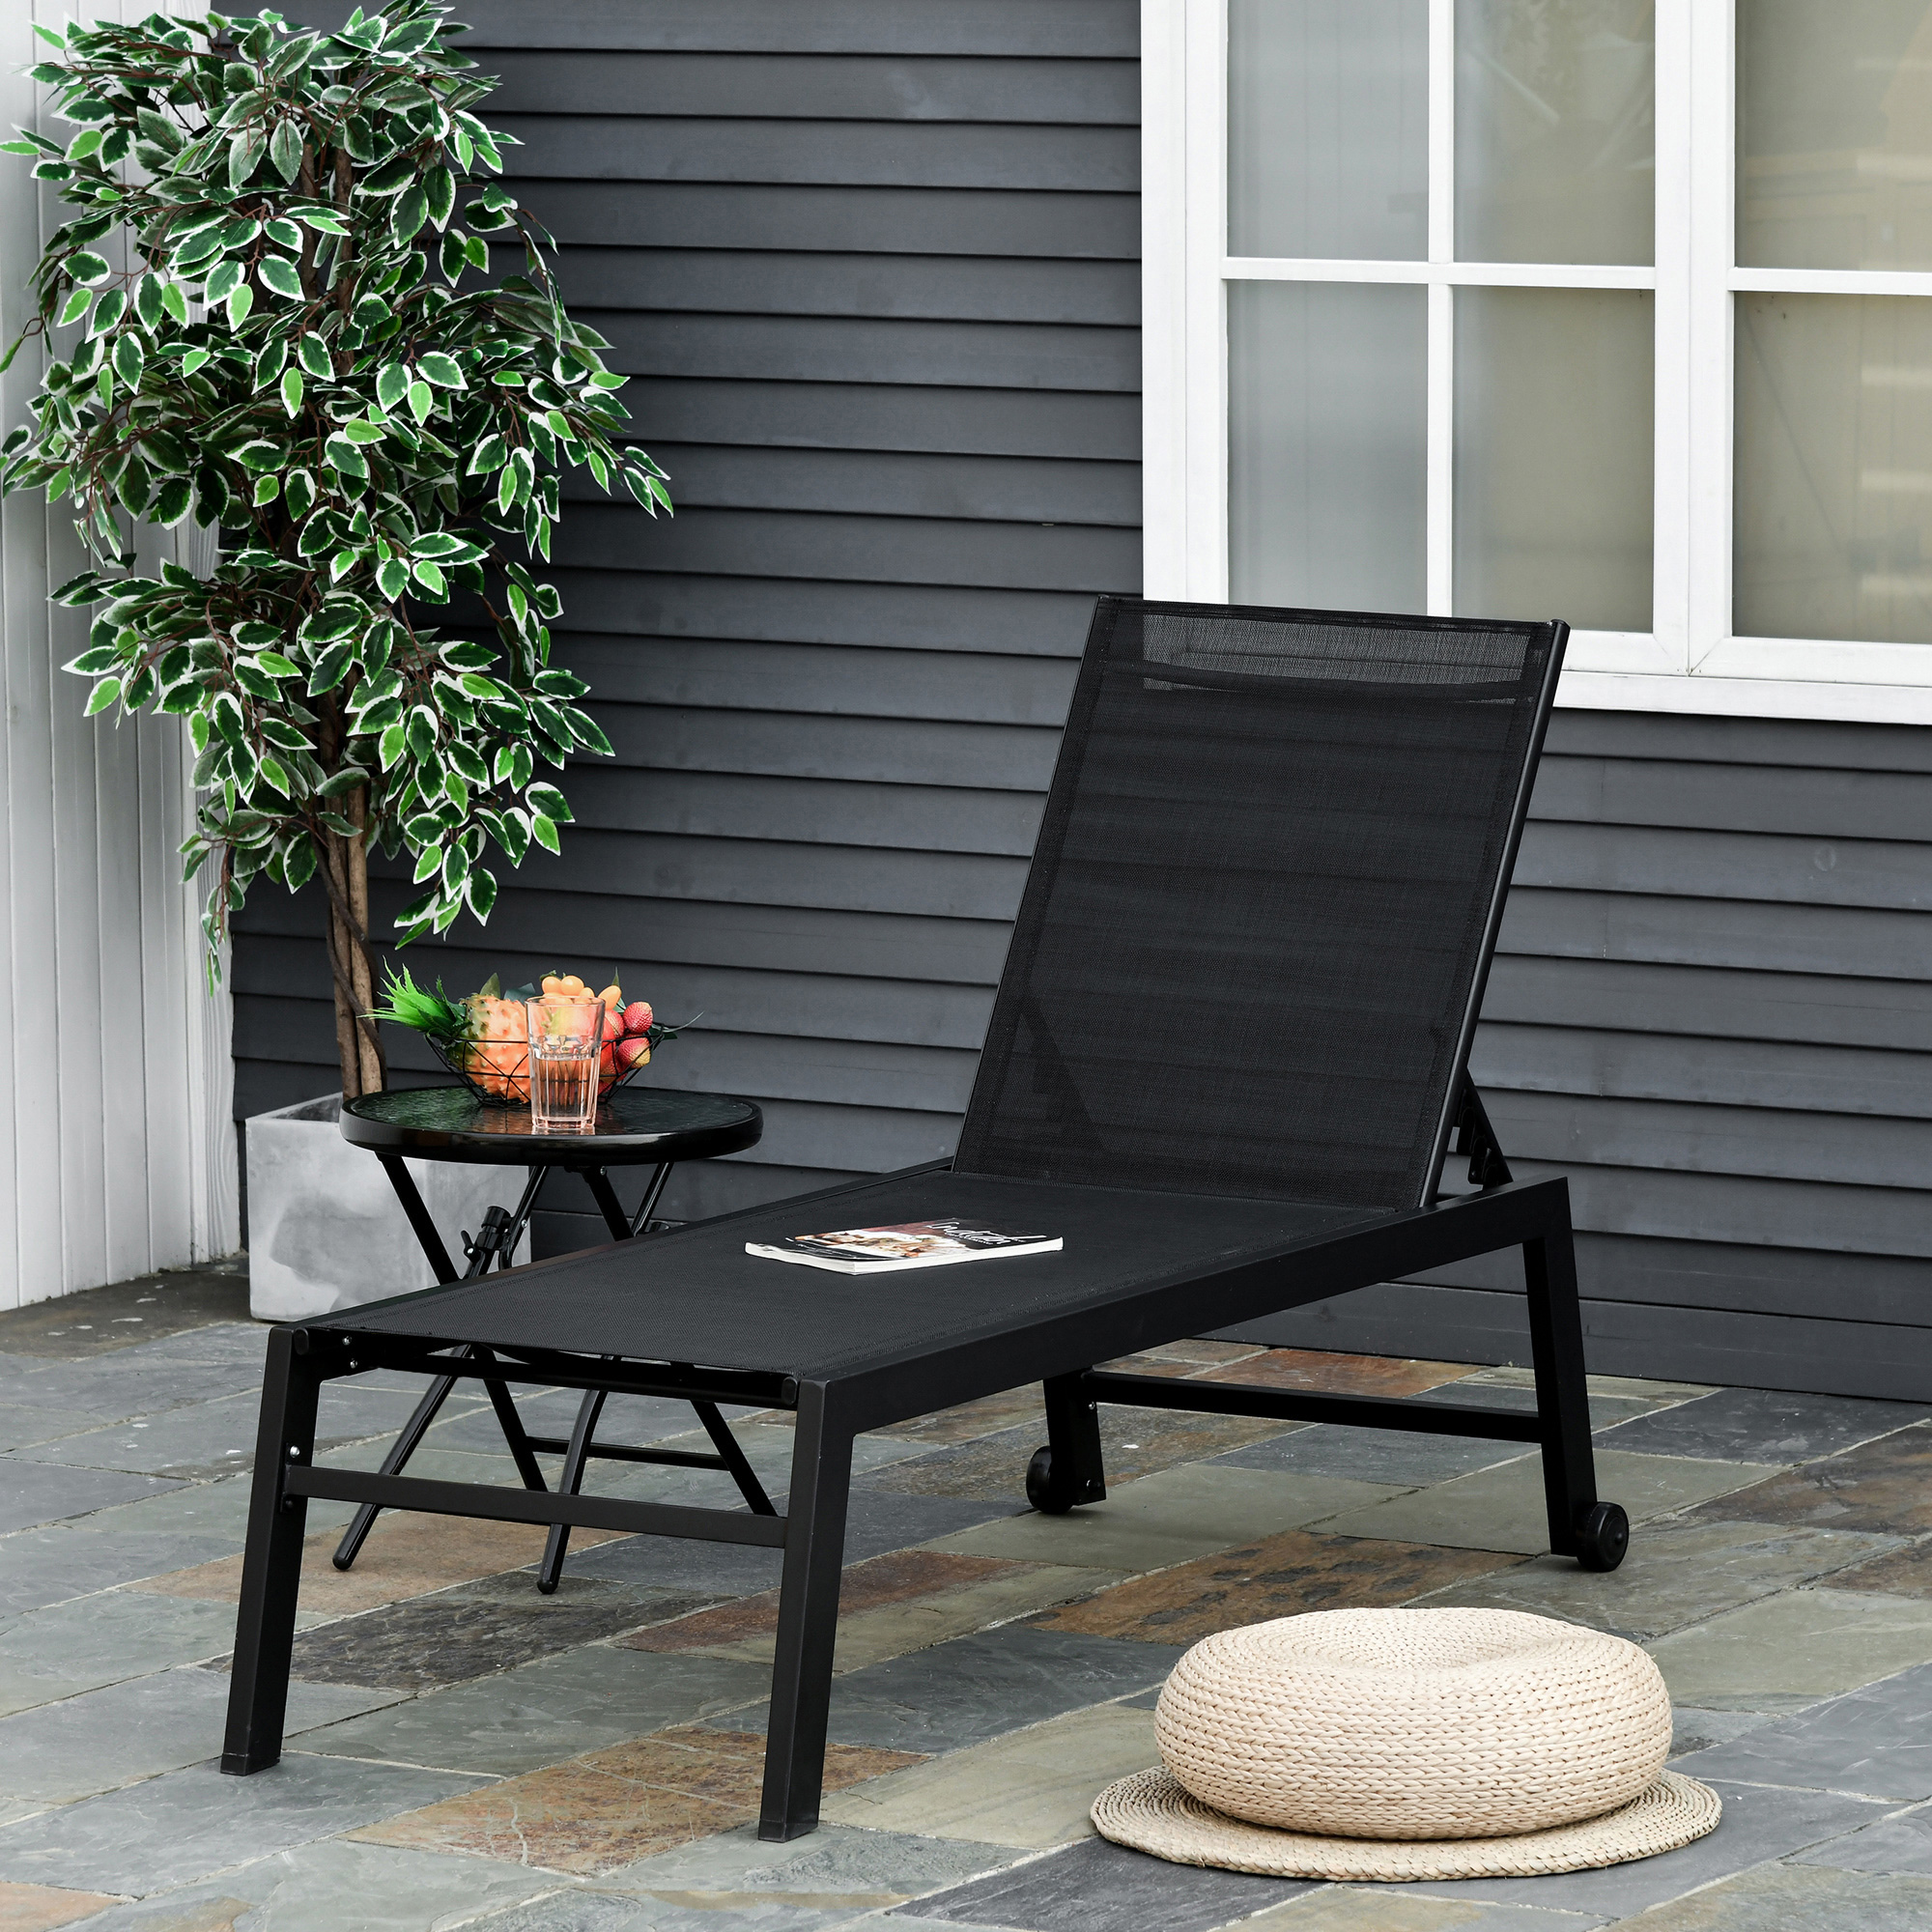 Outsunny Patio Chaise Lounge Chair with 5-Position Backrest, Black - image 2 of 9